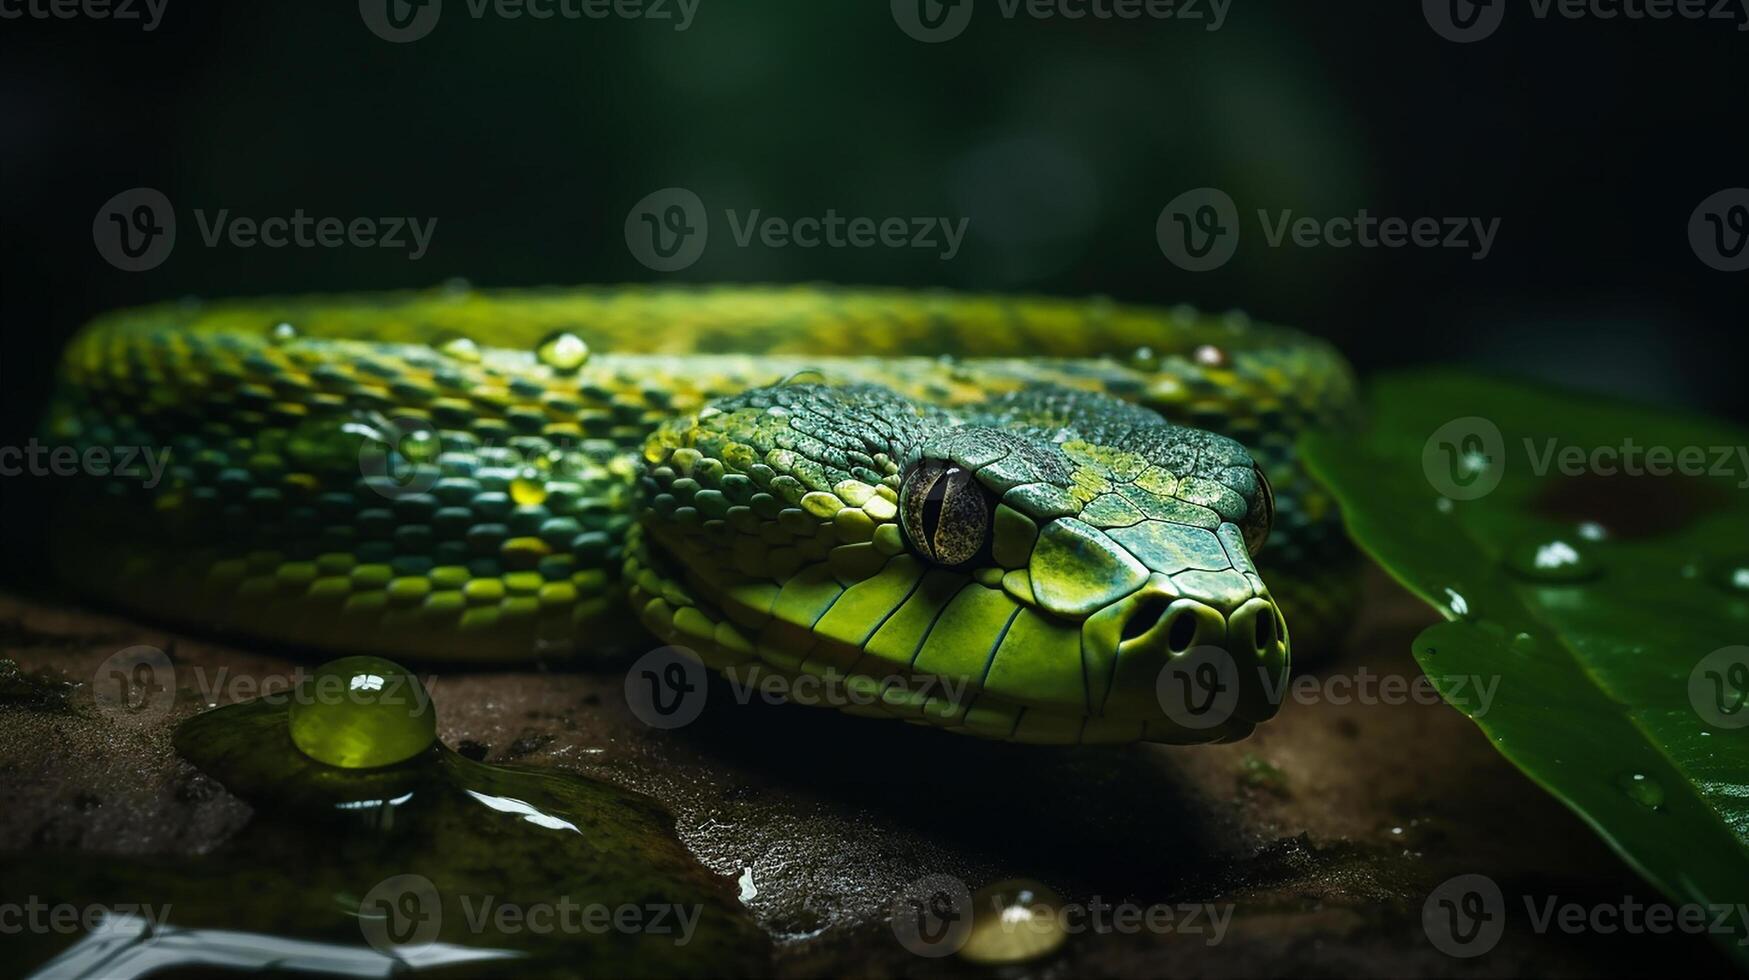 Wild Nature Poisonous Viper Tongue Spiral Snakes in close up portrait generated by ai photo